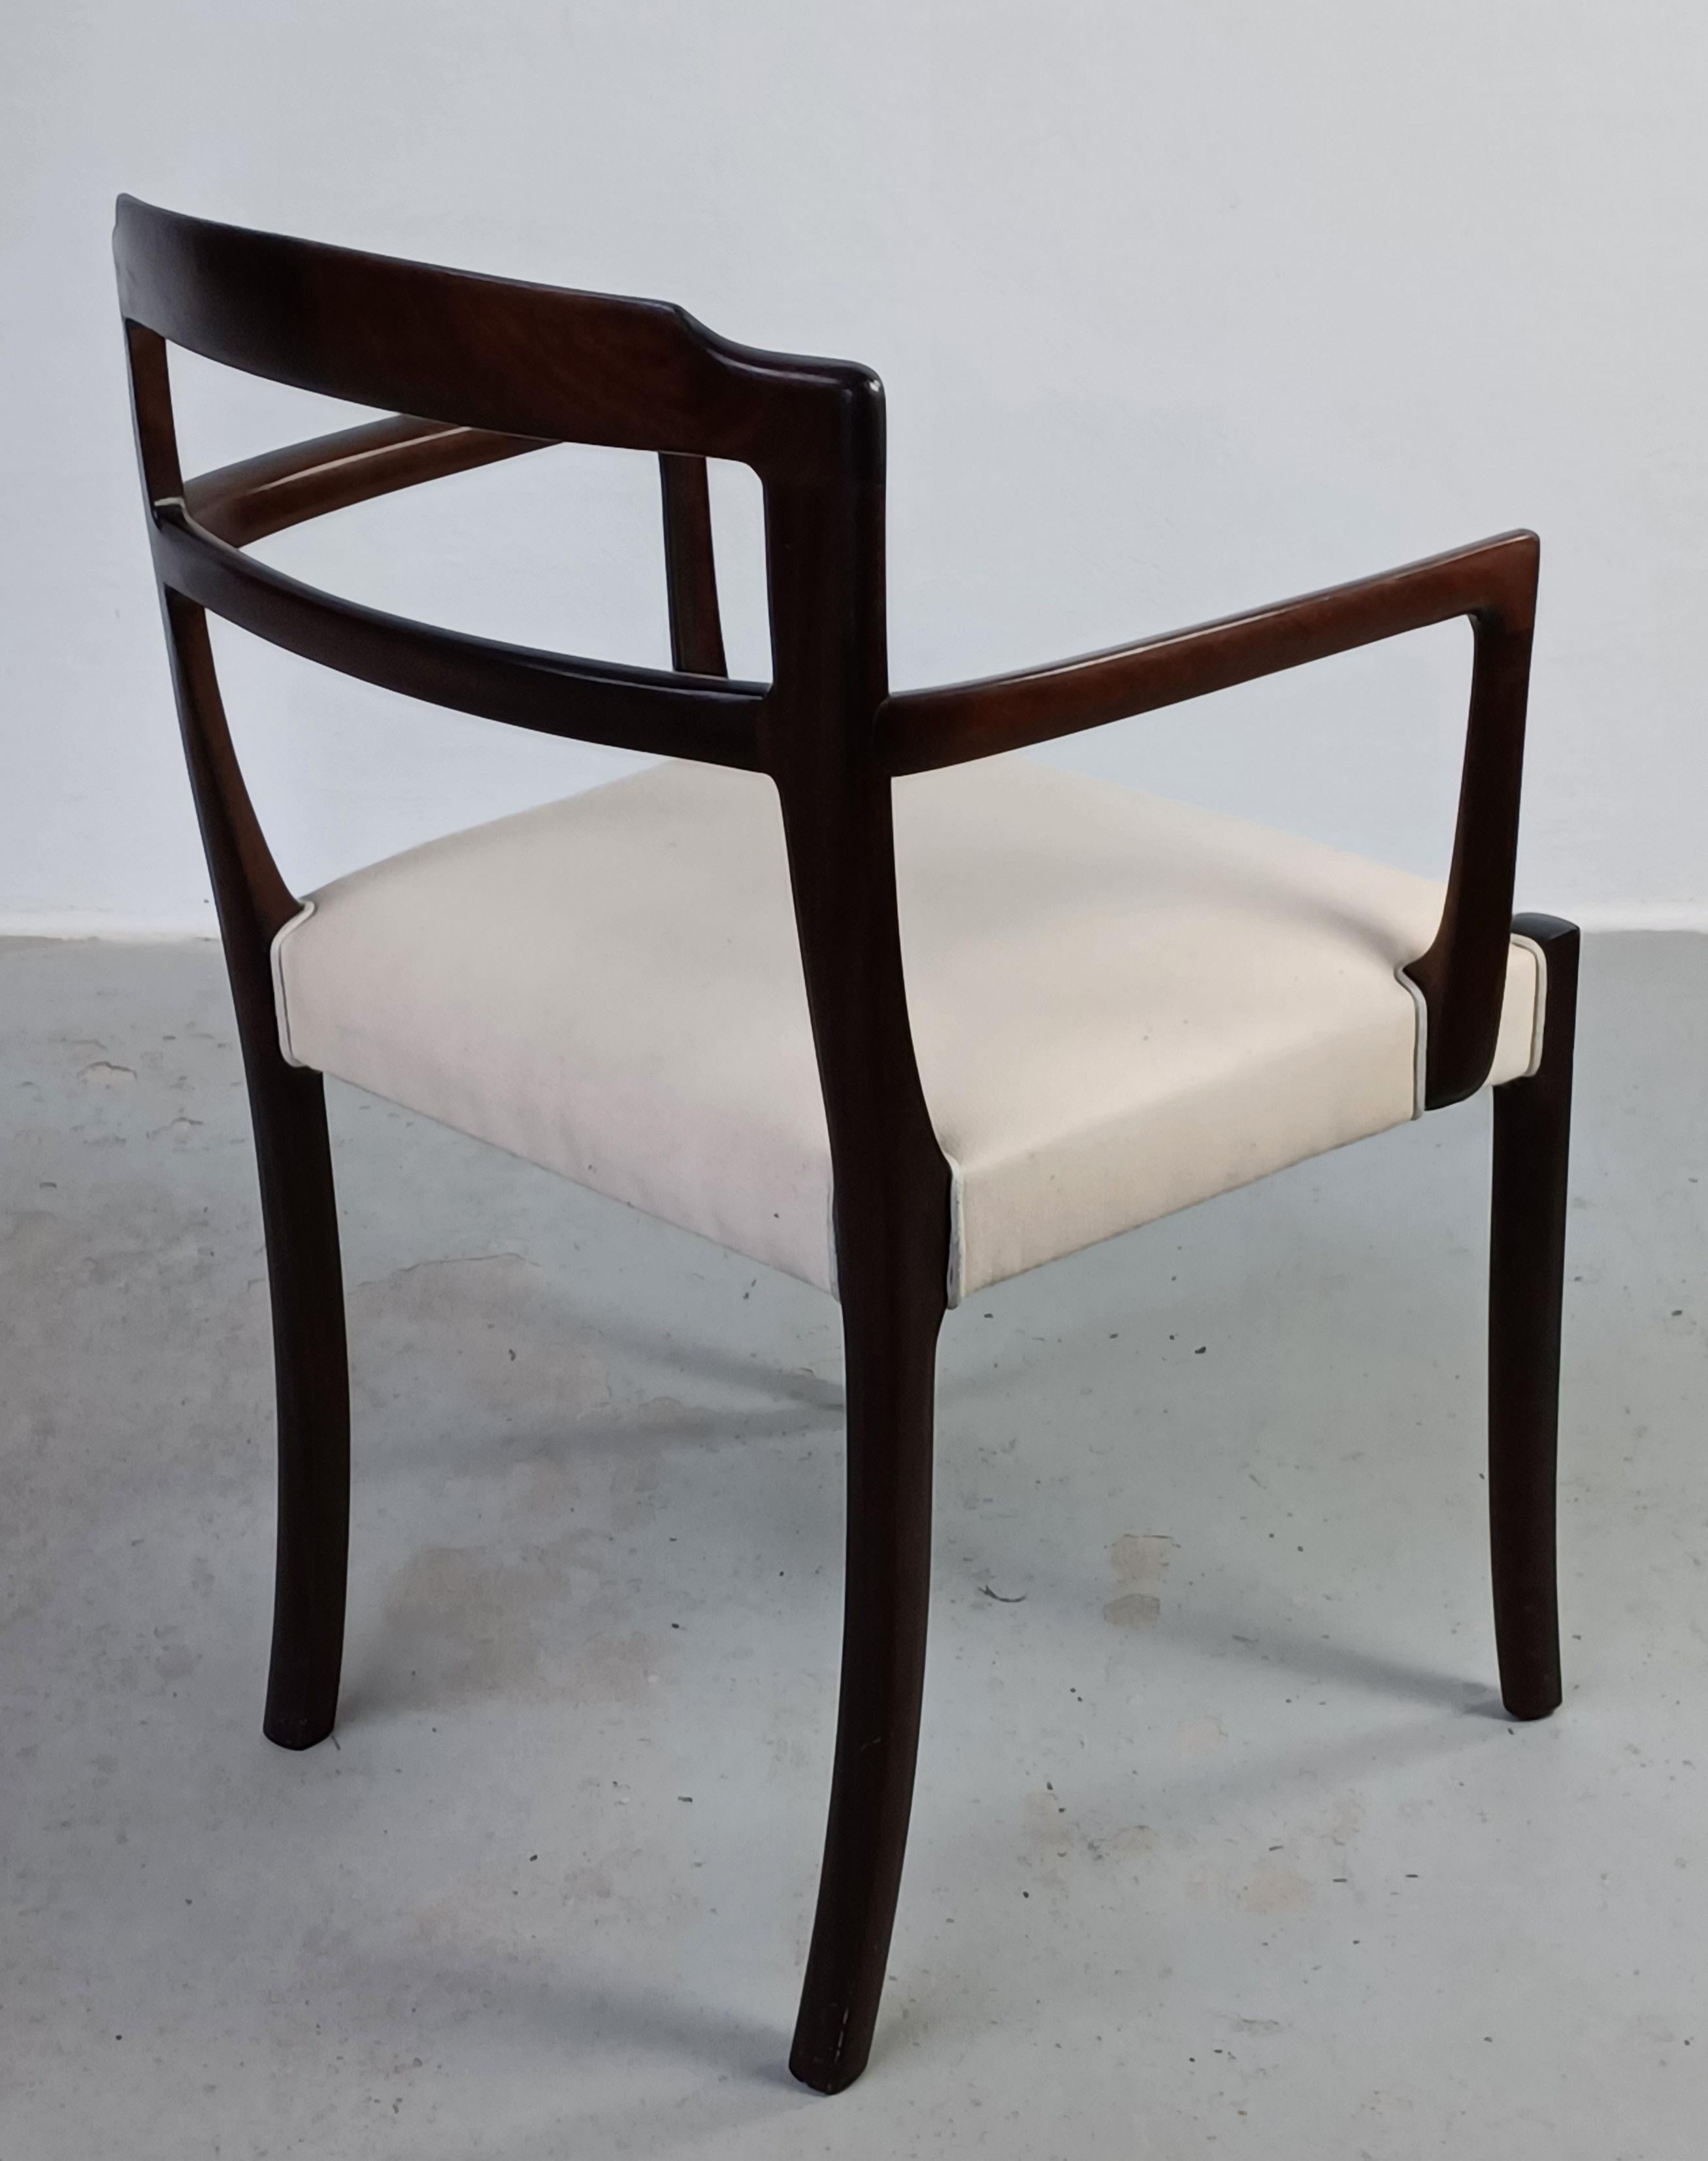 1960's Fully Restored Danish Ole Wanscher Mahogany Arm Chair Custom Upholstery For Sale 2